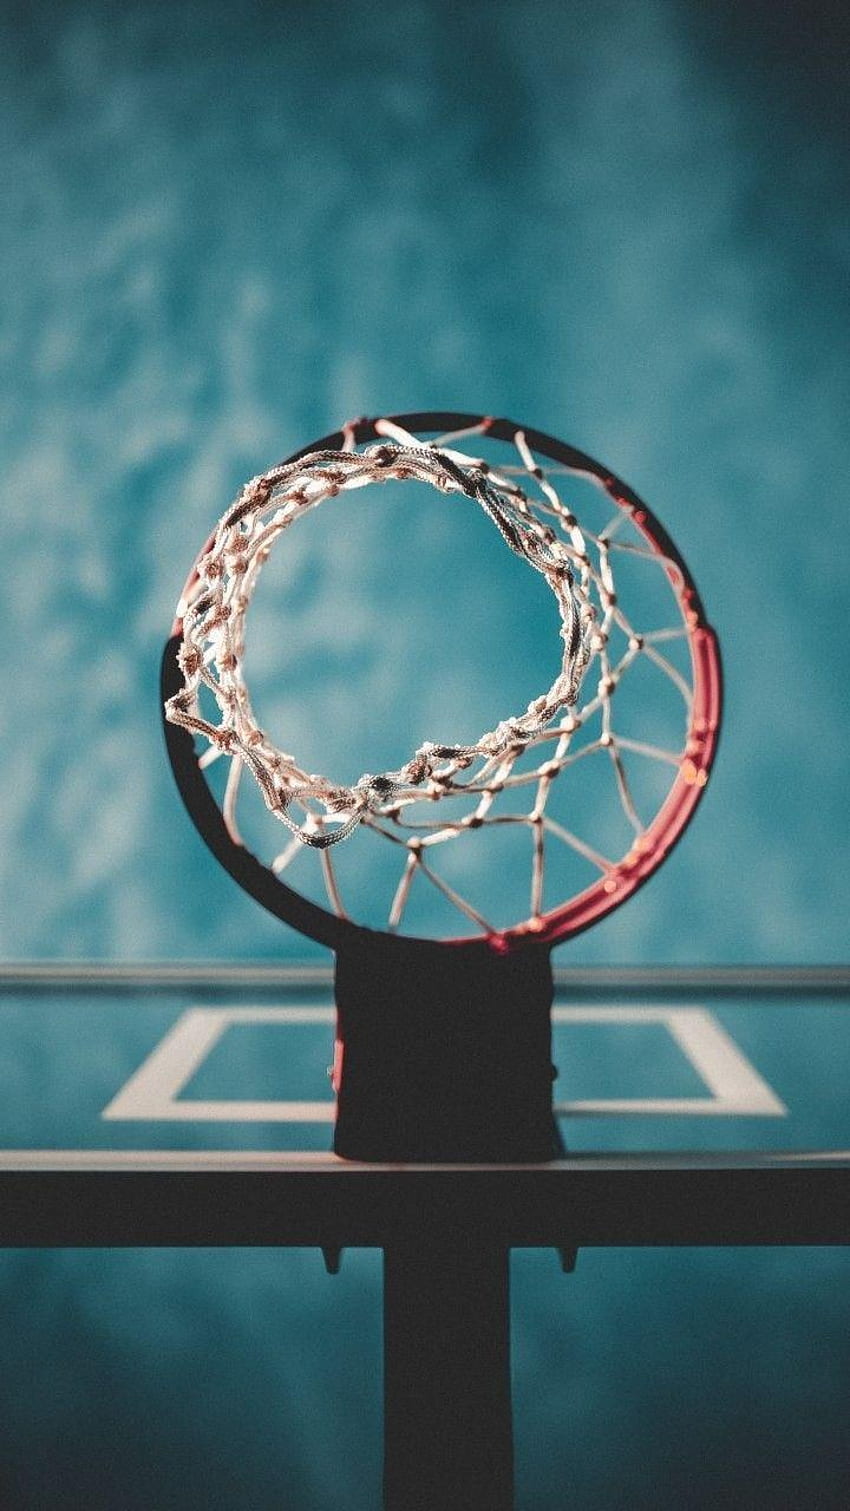 40 Basketball wallpapers HD  Download Free backgrounds